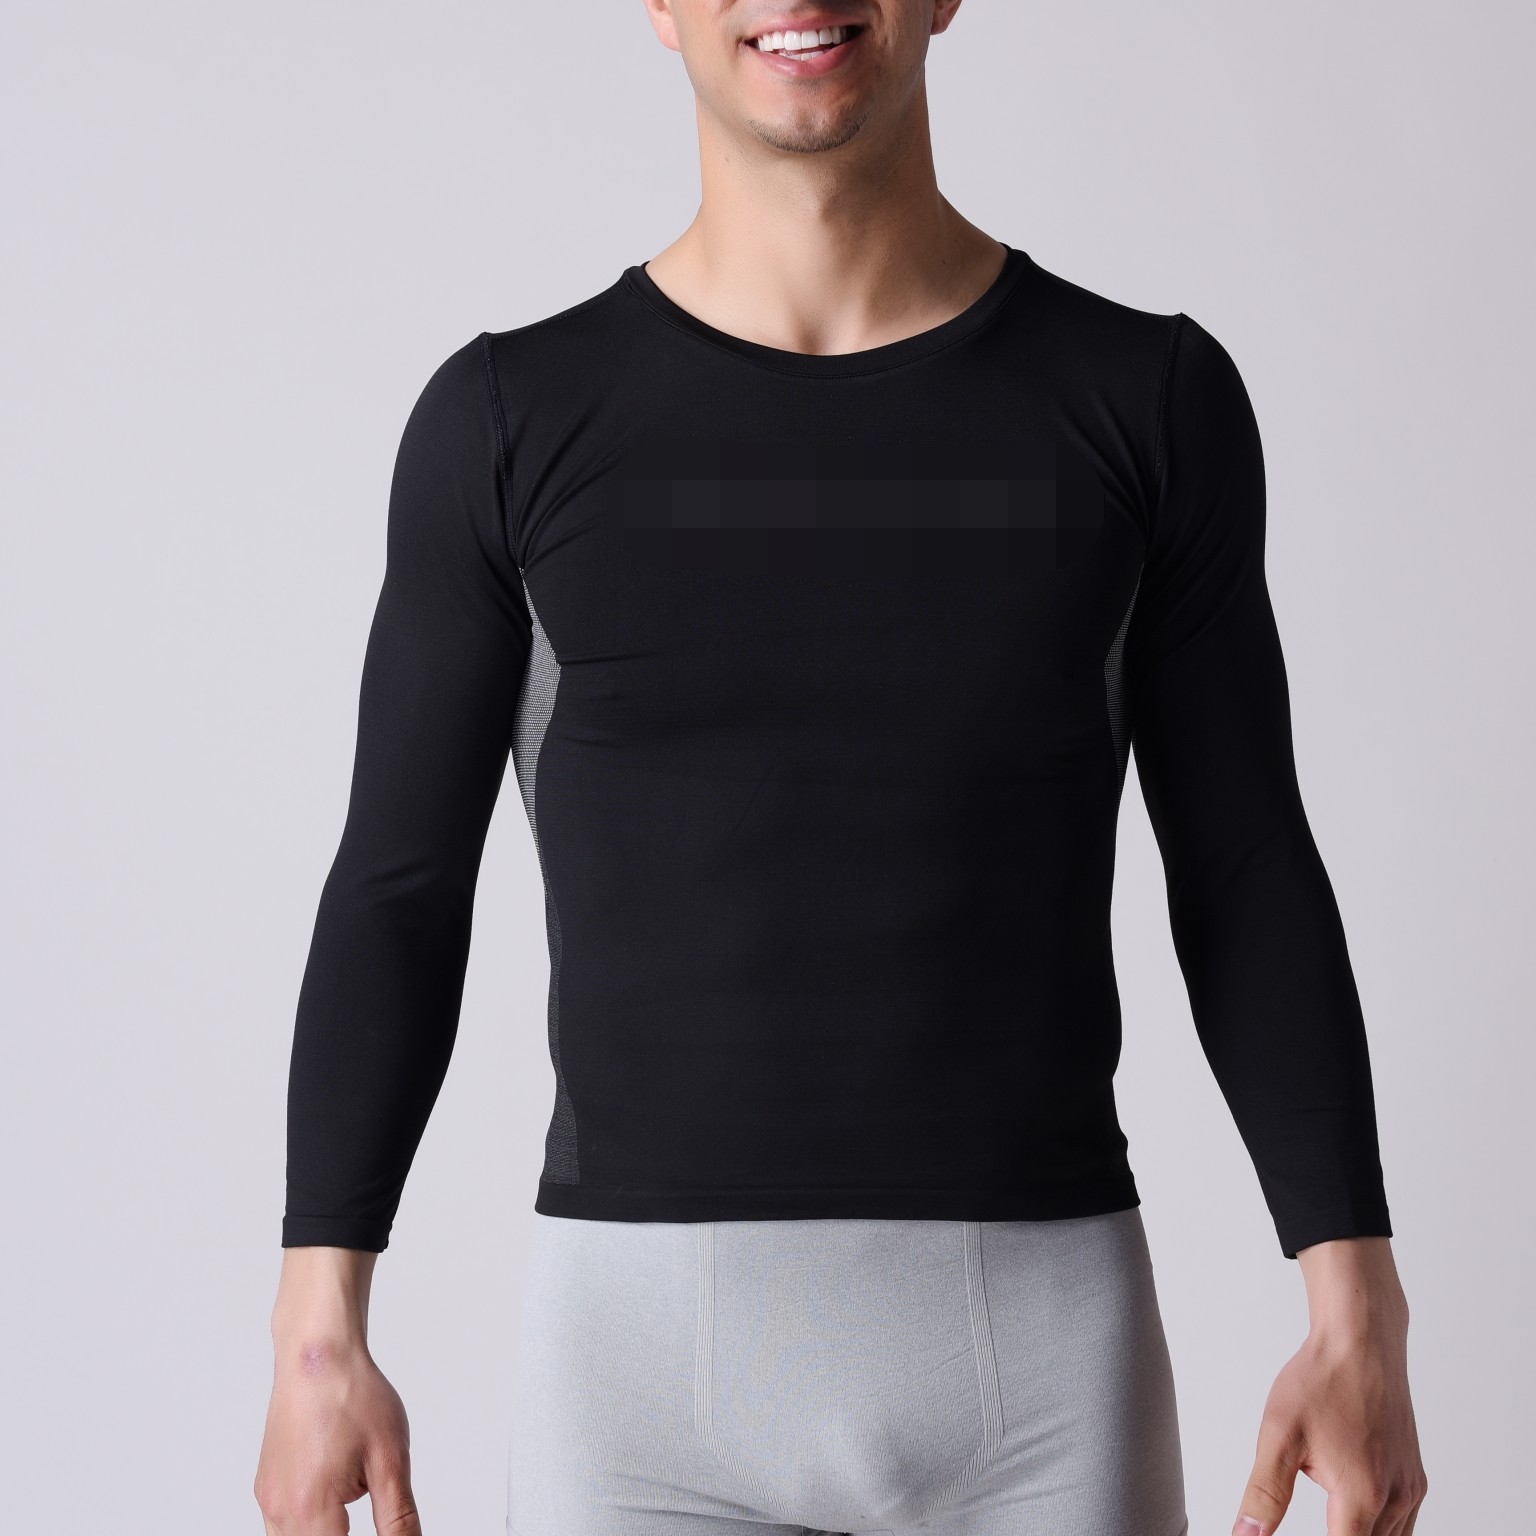 Buy cheap Men sportswear,  elastic for movement,  Athletic Shirt,  Sublimation Yoga shirts,  XLLS001,  More ventilated product